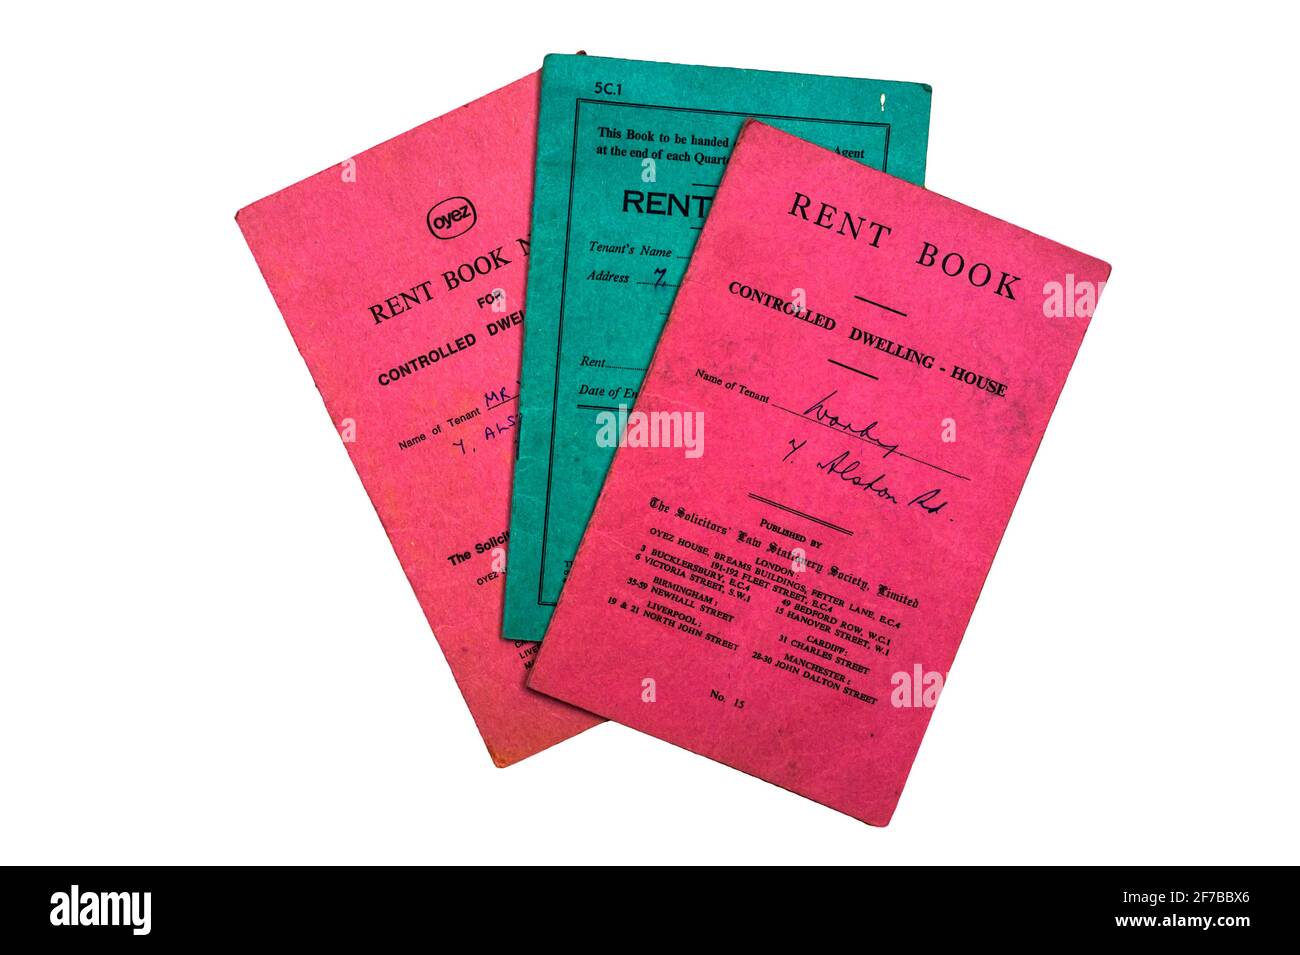 Rent books for rent controlled housing in London in the 1960s. Stock Photo